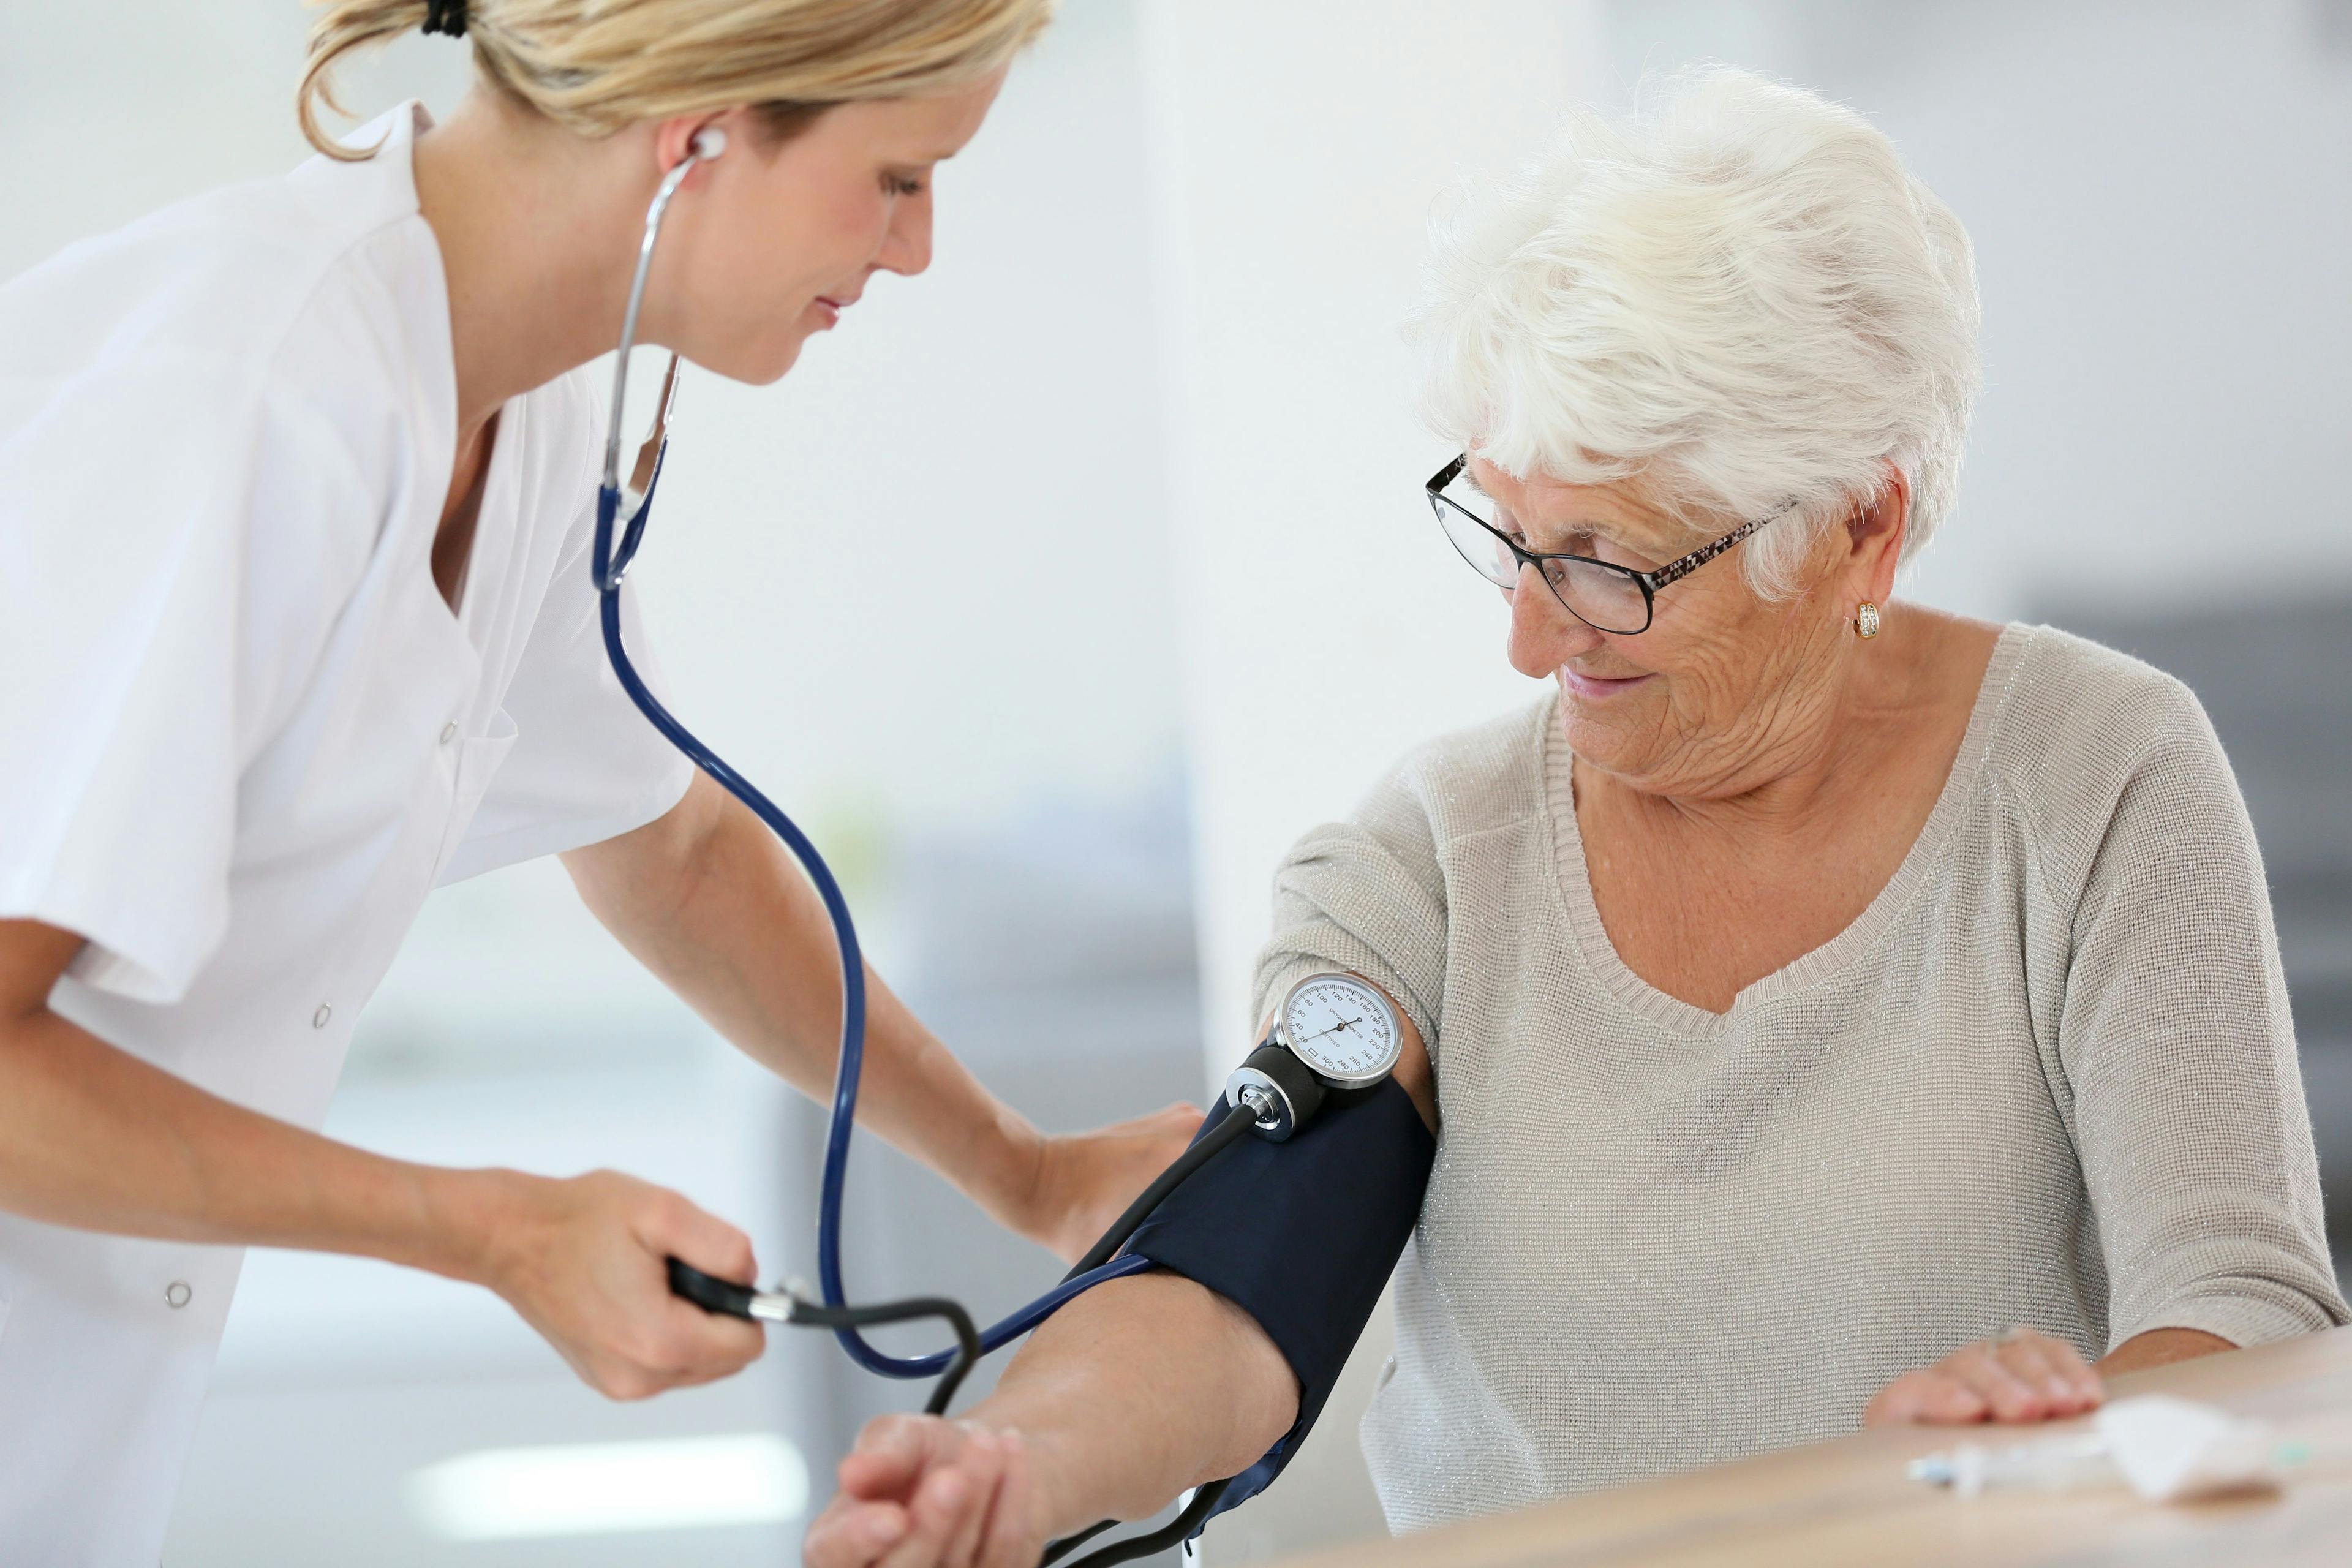 A healthcare provider checking the blood pressure of an older patient.